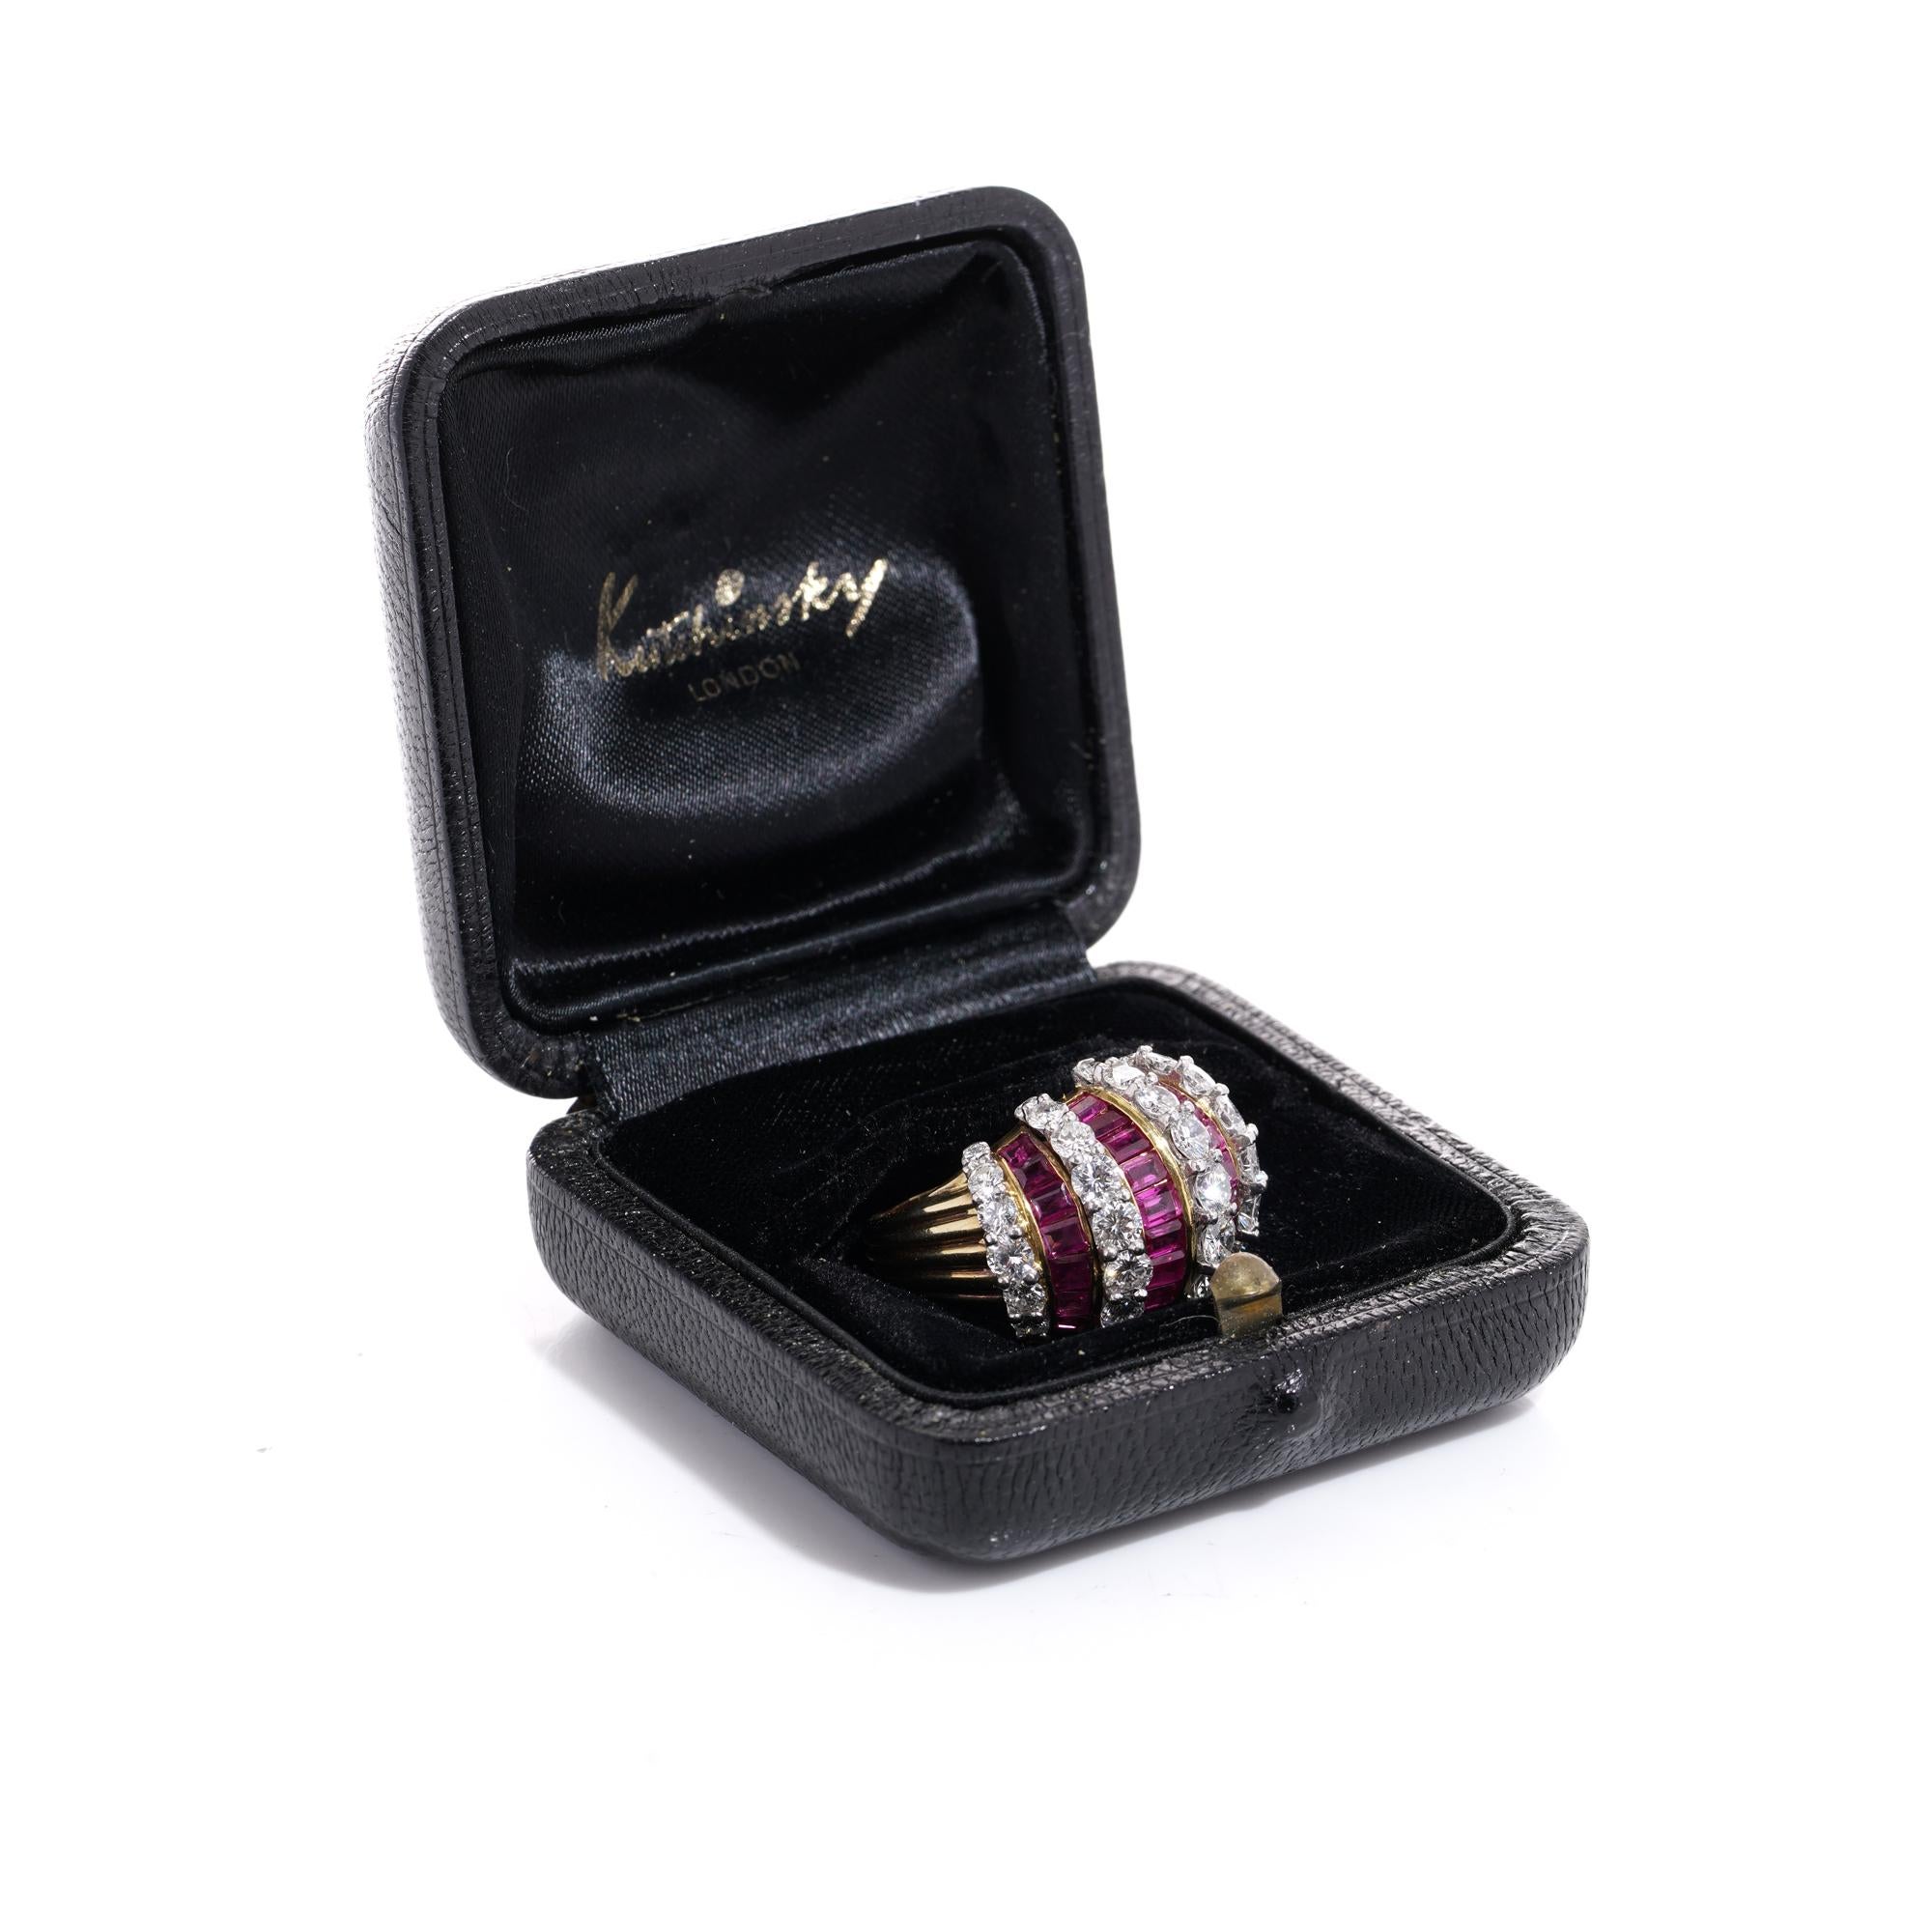 Kutchinsky 18kt. gold ladies' dome ring with 4.00 cts. of diamonds 1.70 cts. of rubies. 
Made in England, 1961
Maker: Kutchinsky
Fully hallmarked. 

Comes in the original box.

Dimensions-
Finger Size (UK) = P 1/2 (US) = 8.25 (EU) = 57 1/2
Ring